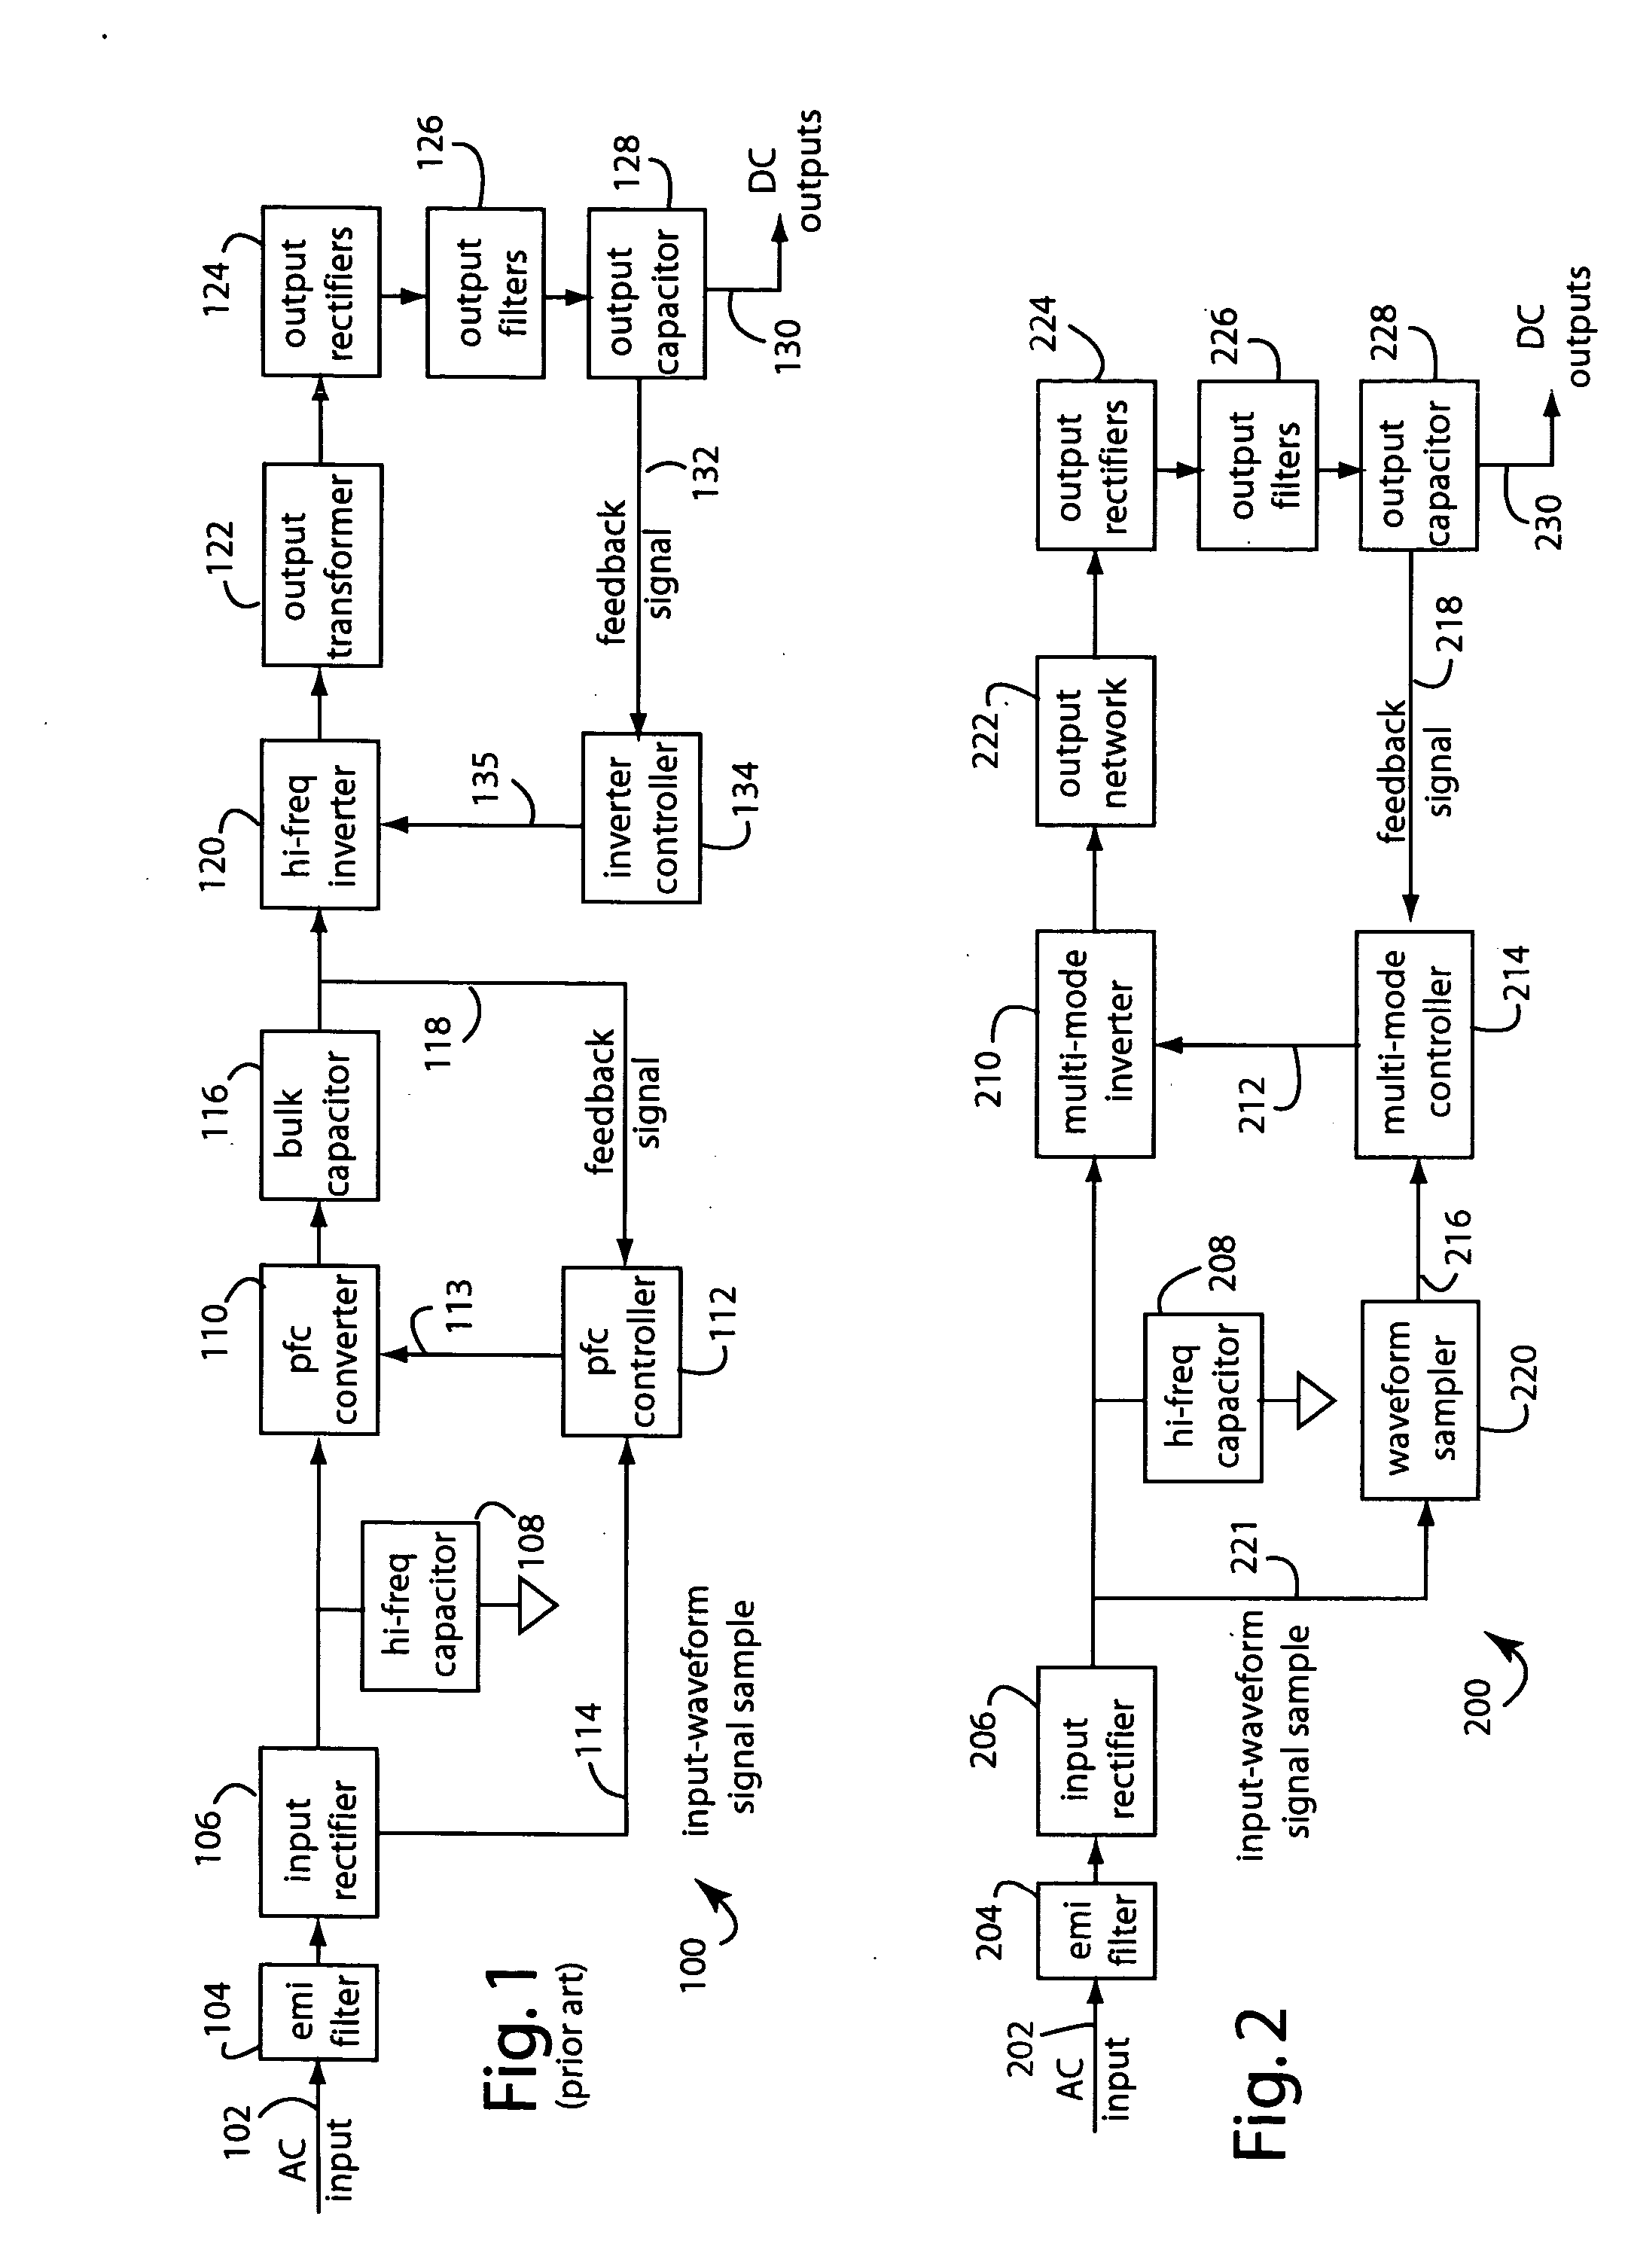 Single-stage power converter with high power factor